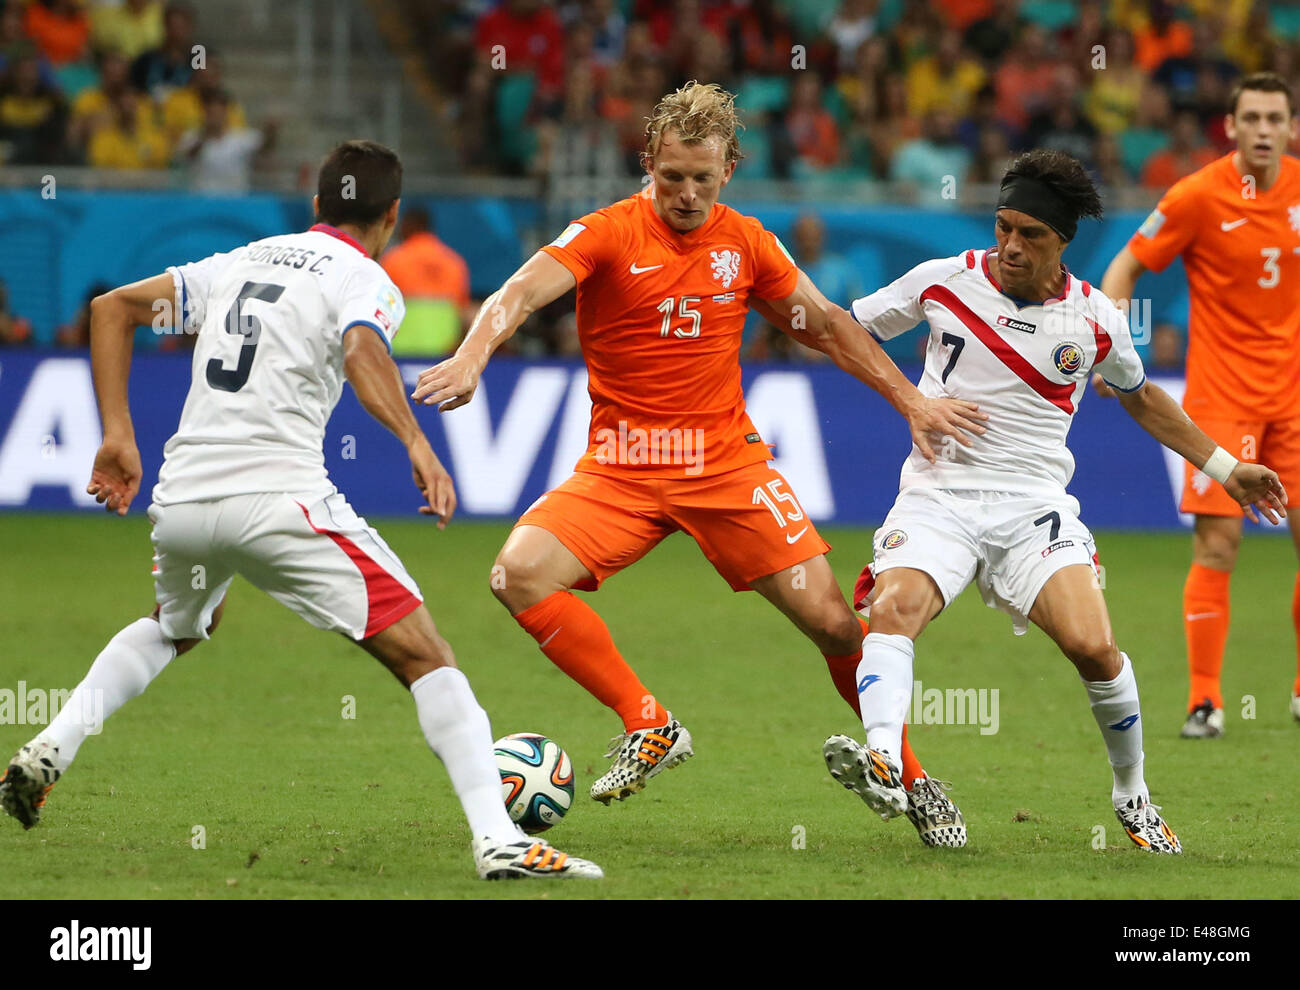 Salvador, Brazil. 5th July, 2014. Costa Rica's Celso Borges (1st L) and Christian Bolanos (3rd L) defend against Netherlands' Dirk Kuyt (2nd L) during a quarter-finals match between Netherlands and Costa Rica of 2014 FIFA World Cup at the Arena Fonte Nova Stadium in Salvador, Brazil, on July 5, 2014. Credit:  Cao Can/Xinhua/Alamy Live News Stock Photo